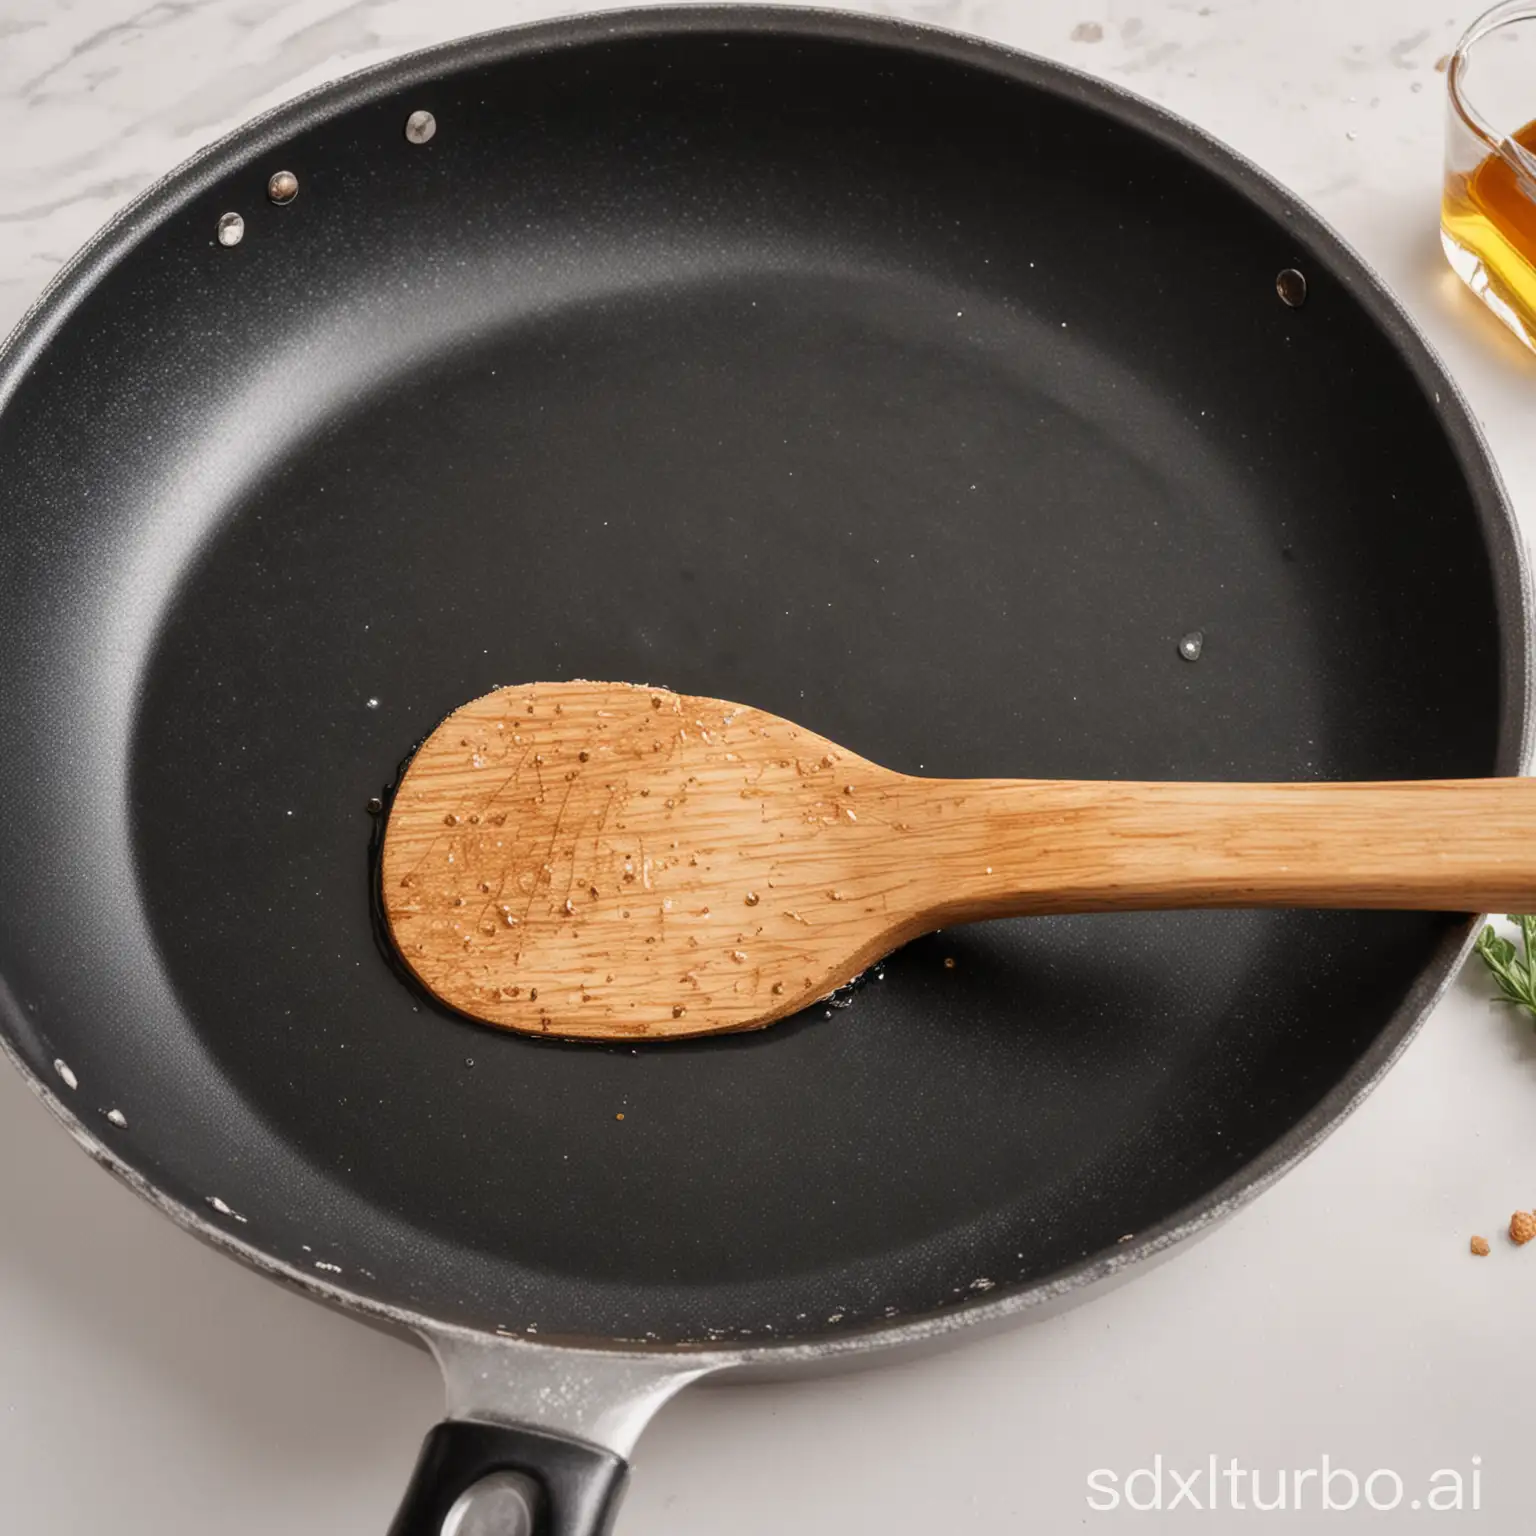 A close up of a non-stick frying pan. The background is white. A spatula is resting across the pan, with a small amount of oil shimmering on its surface.